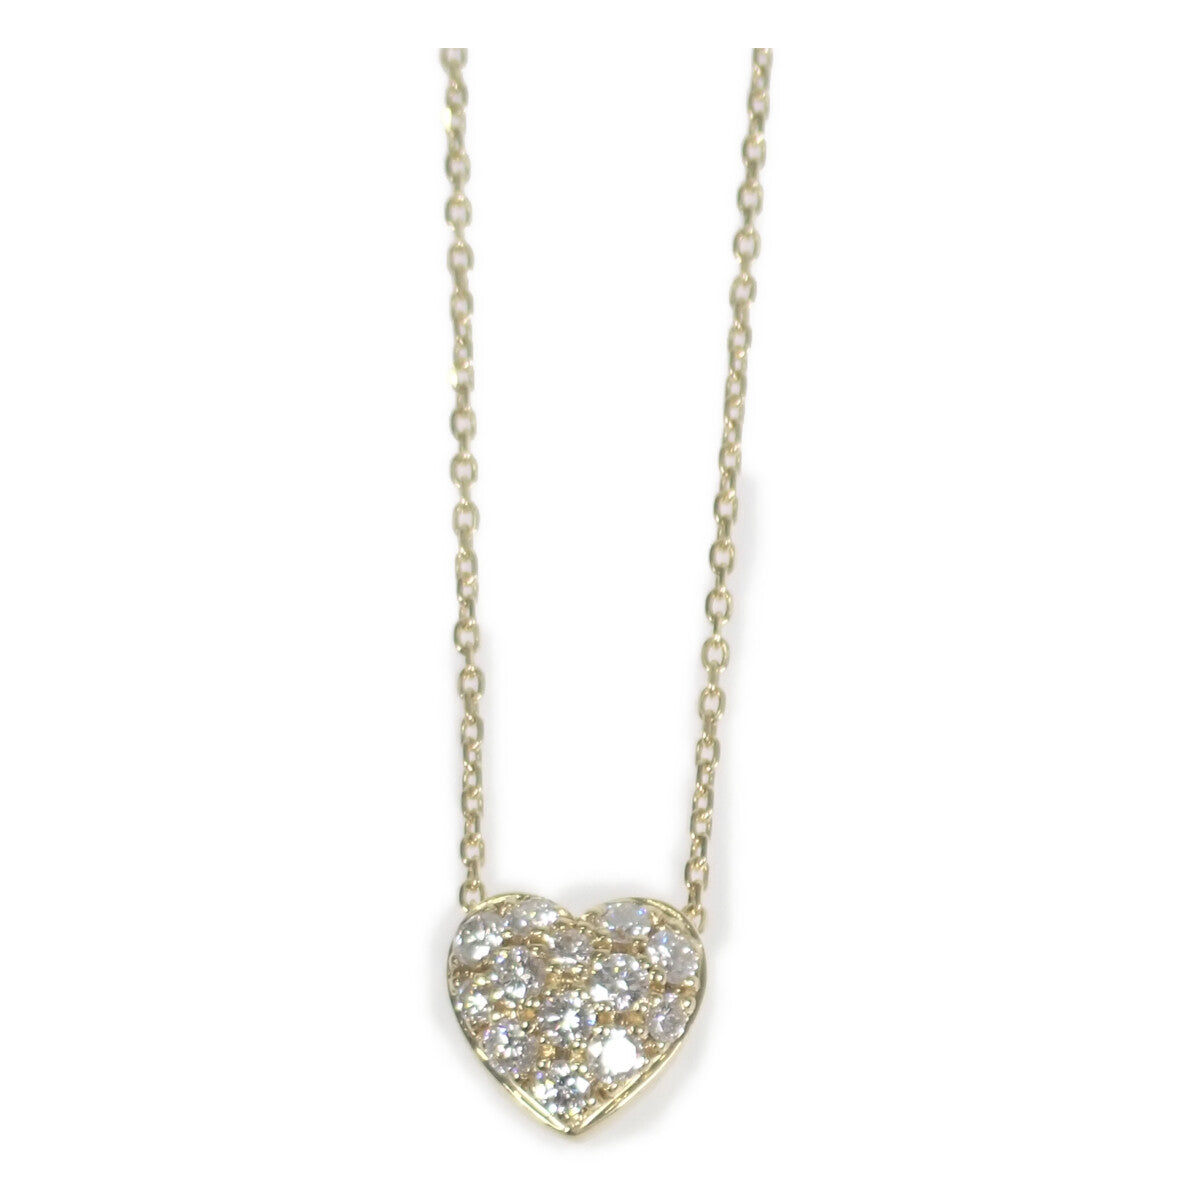 LuxUness  Ladies' K18 Yellow Gold Heart Pave Design Diamond Necklace (0.30ct) - Gold Tone, Preowned in Excellent condition